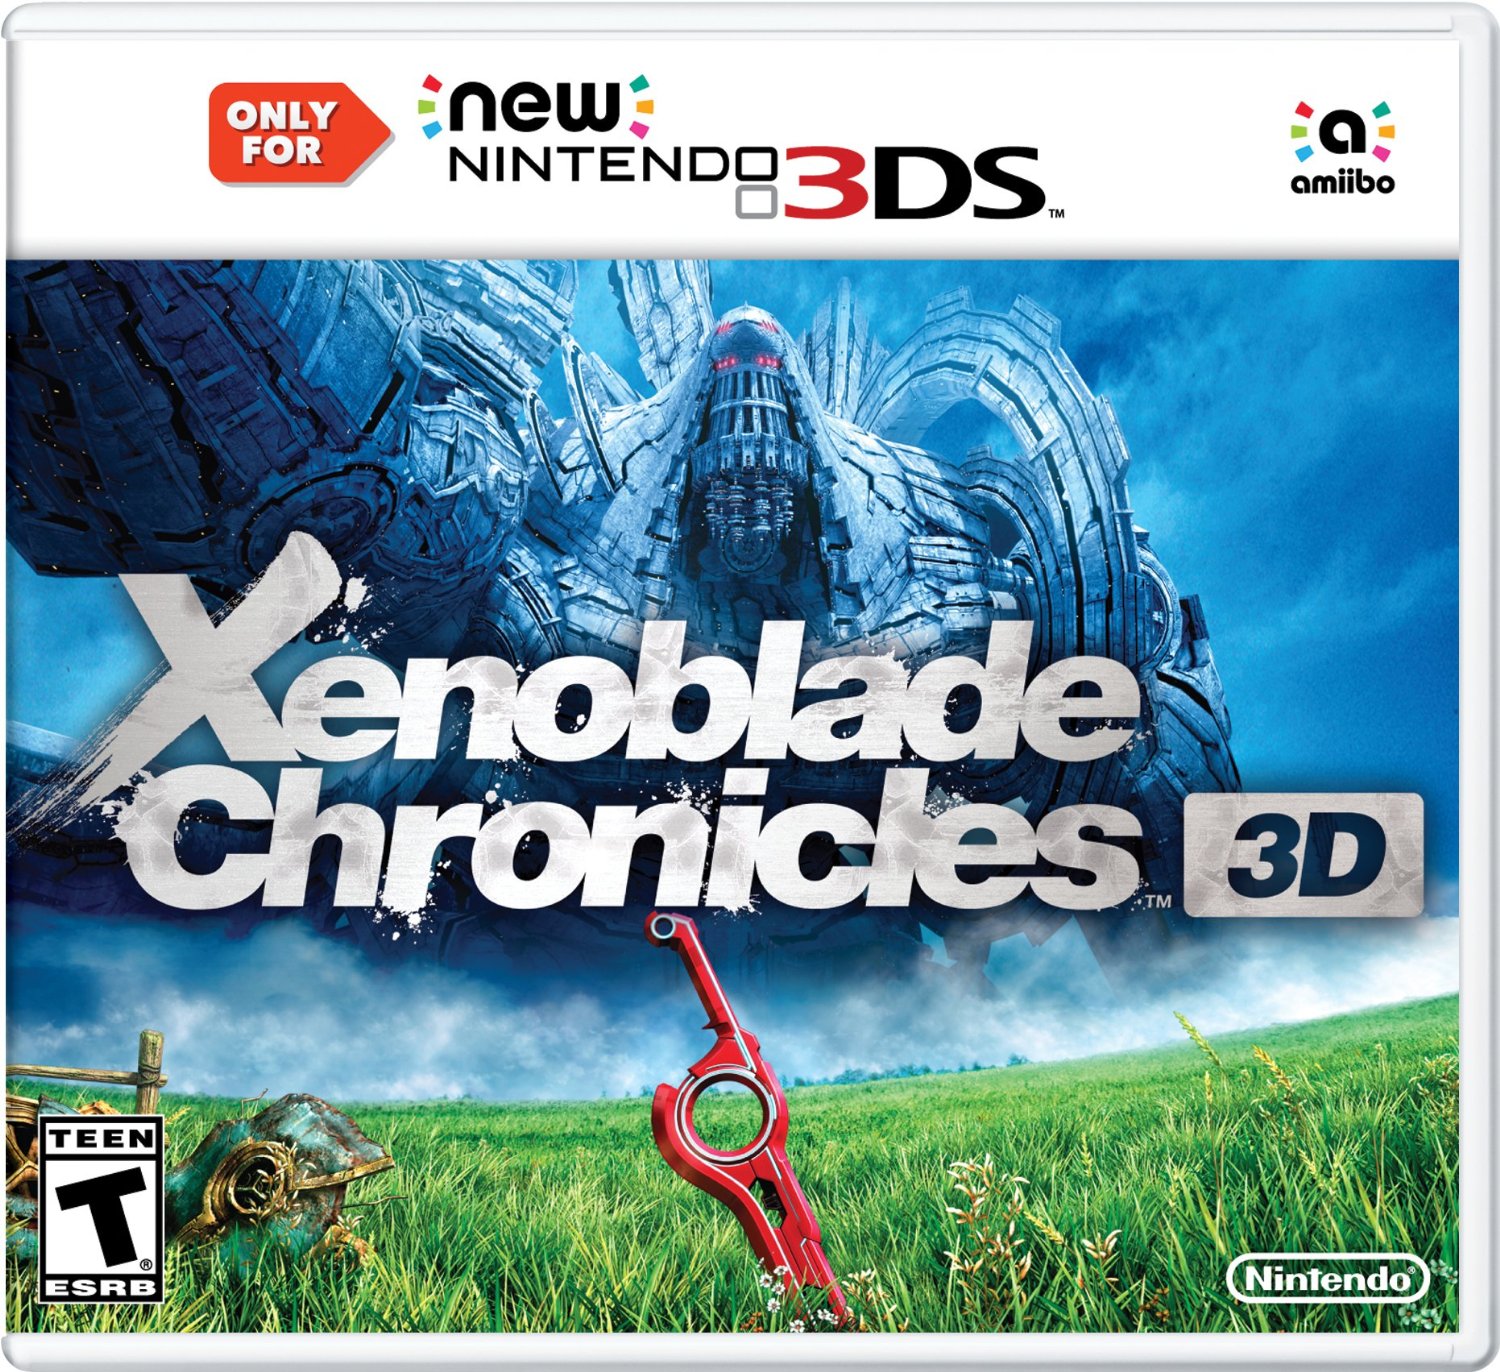 3ds game box